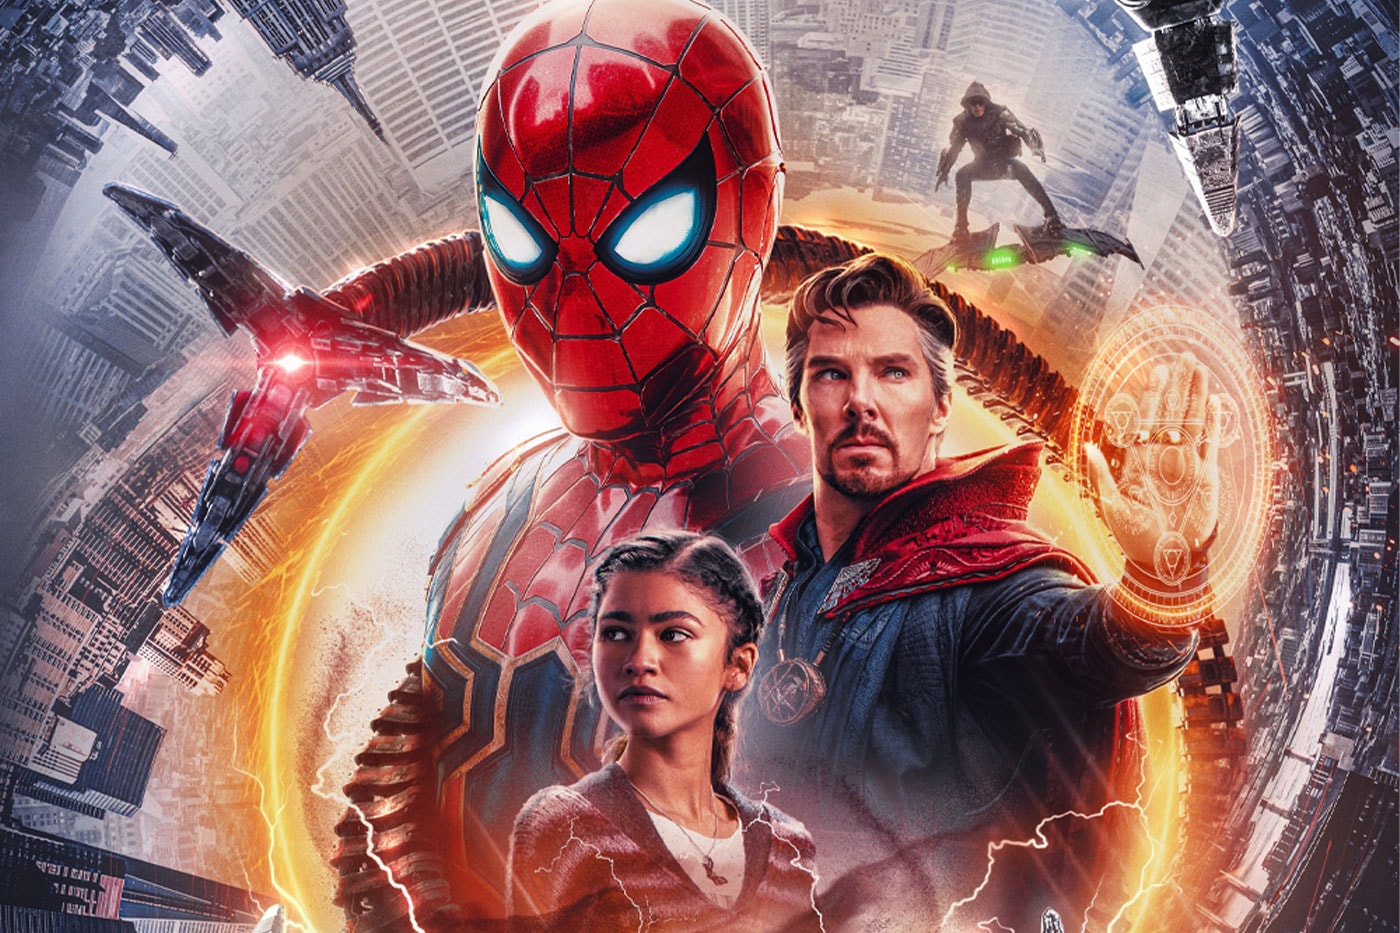 The Entire 'Spider-Man: No Way Home' Script Is Now Available To Read Online for Free marvel cinematic universe mcu doctor strange tom holland zendaya tobey maguire andrew garfield benedict cumberbatch Erik Sommers and Chris McKenna sony